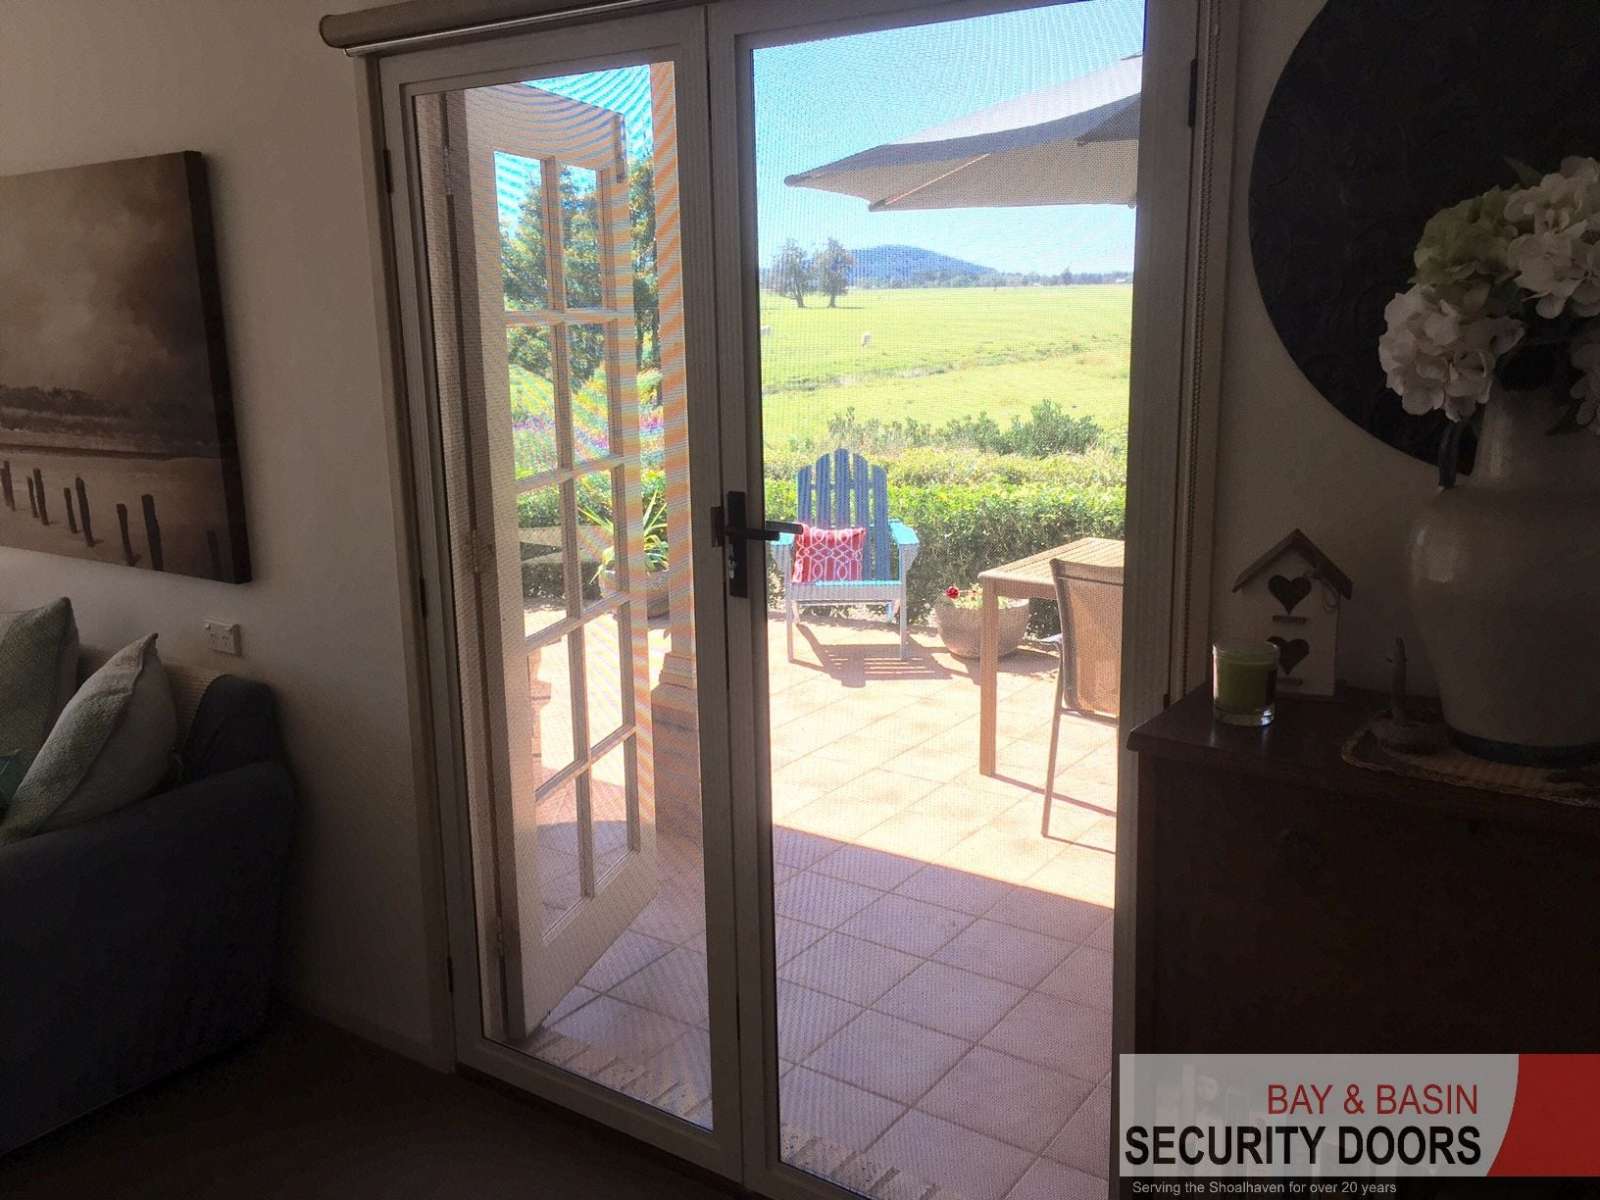 A Secure View with Bay & Basin Security Doors